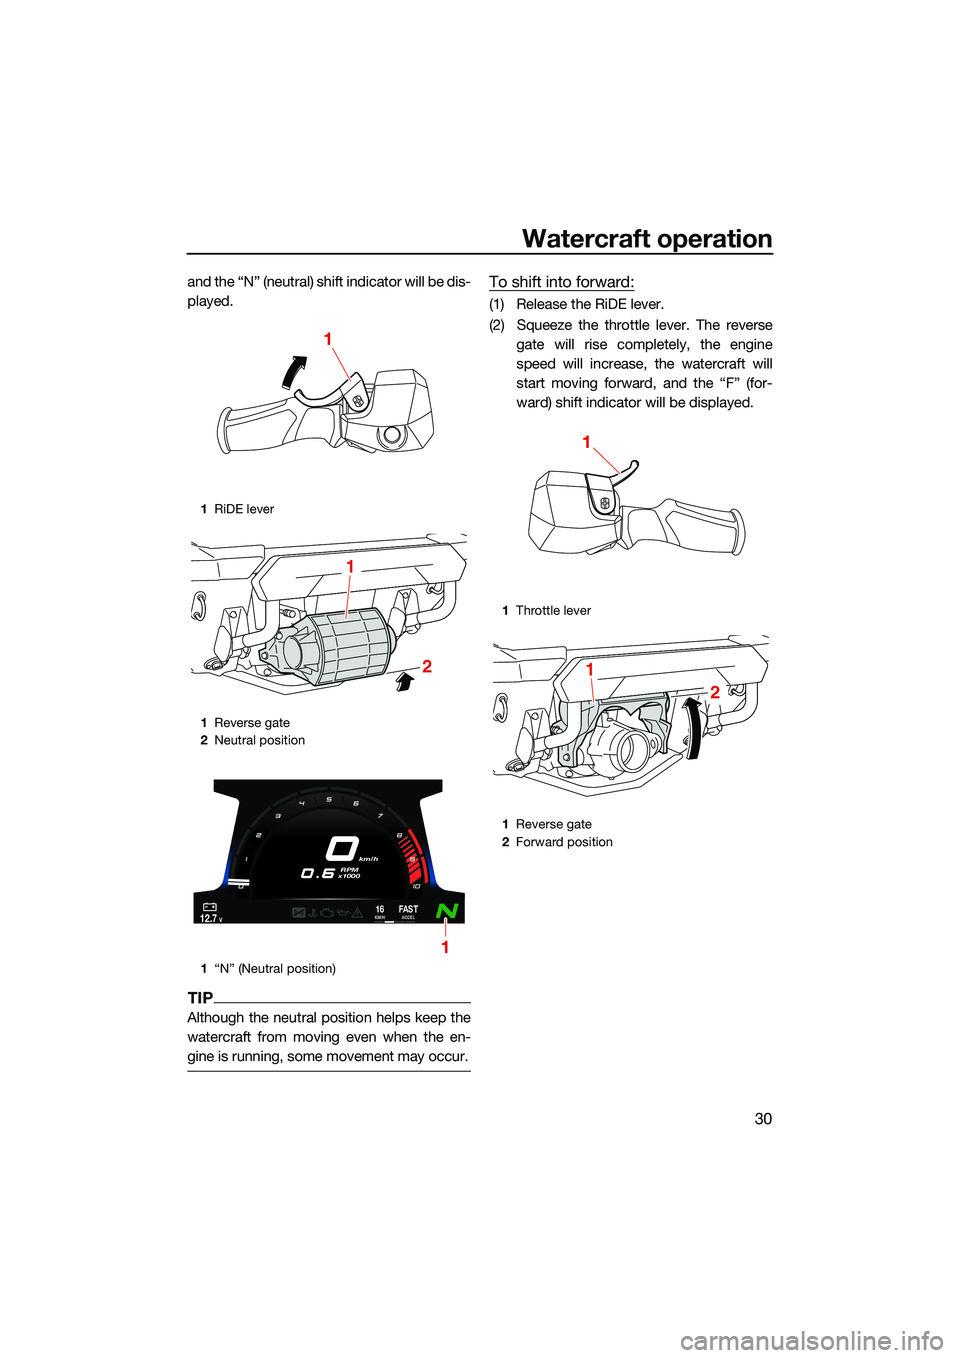 YAMAHA FX HO CRUISER 2022 Owners Guide Watercraft operation
30
and the “N” (neutral) shift indicator will be dis-
played.
TIP
Although the neutral position helps keep the
watercraft from moving even when the en-
gine is running, some m